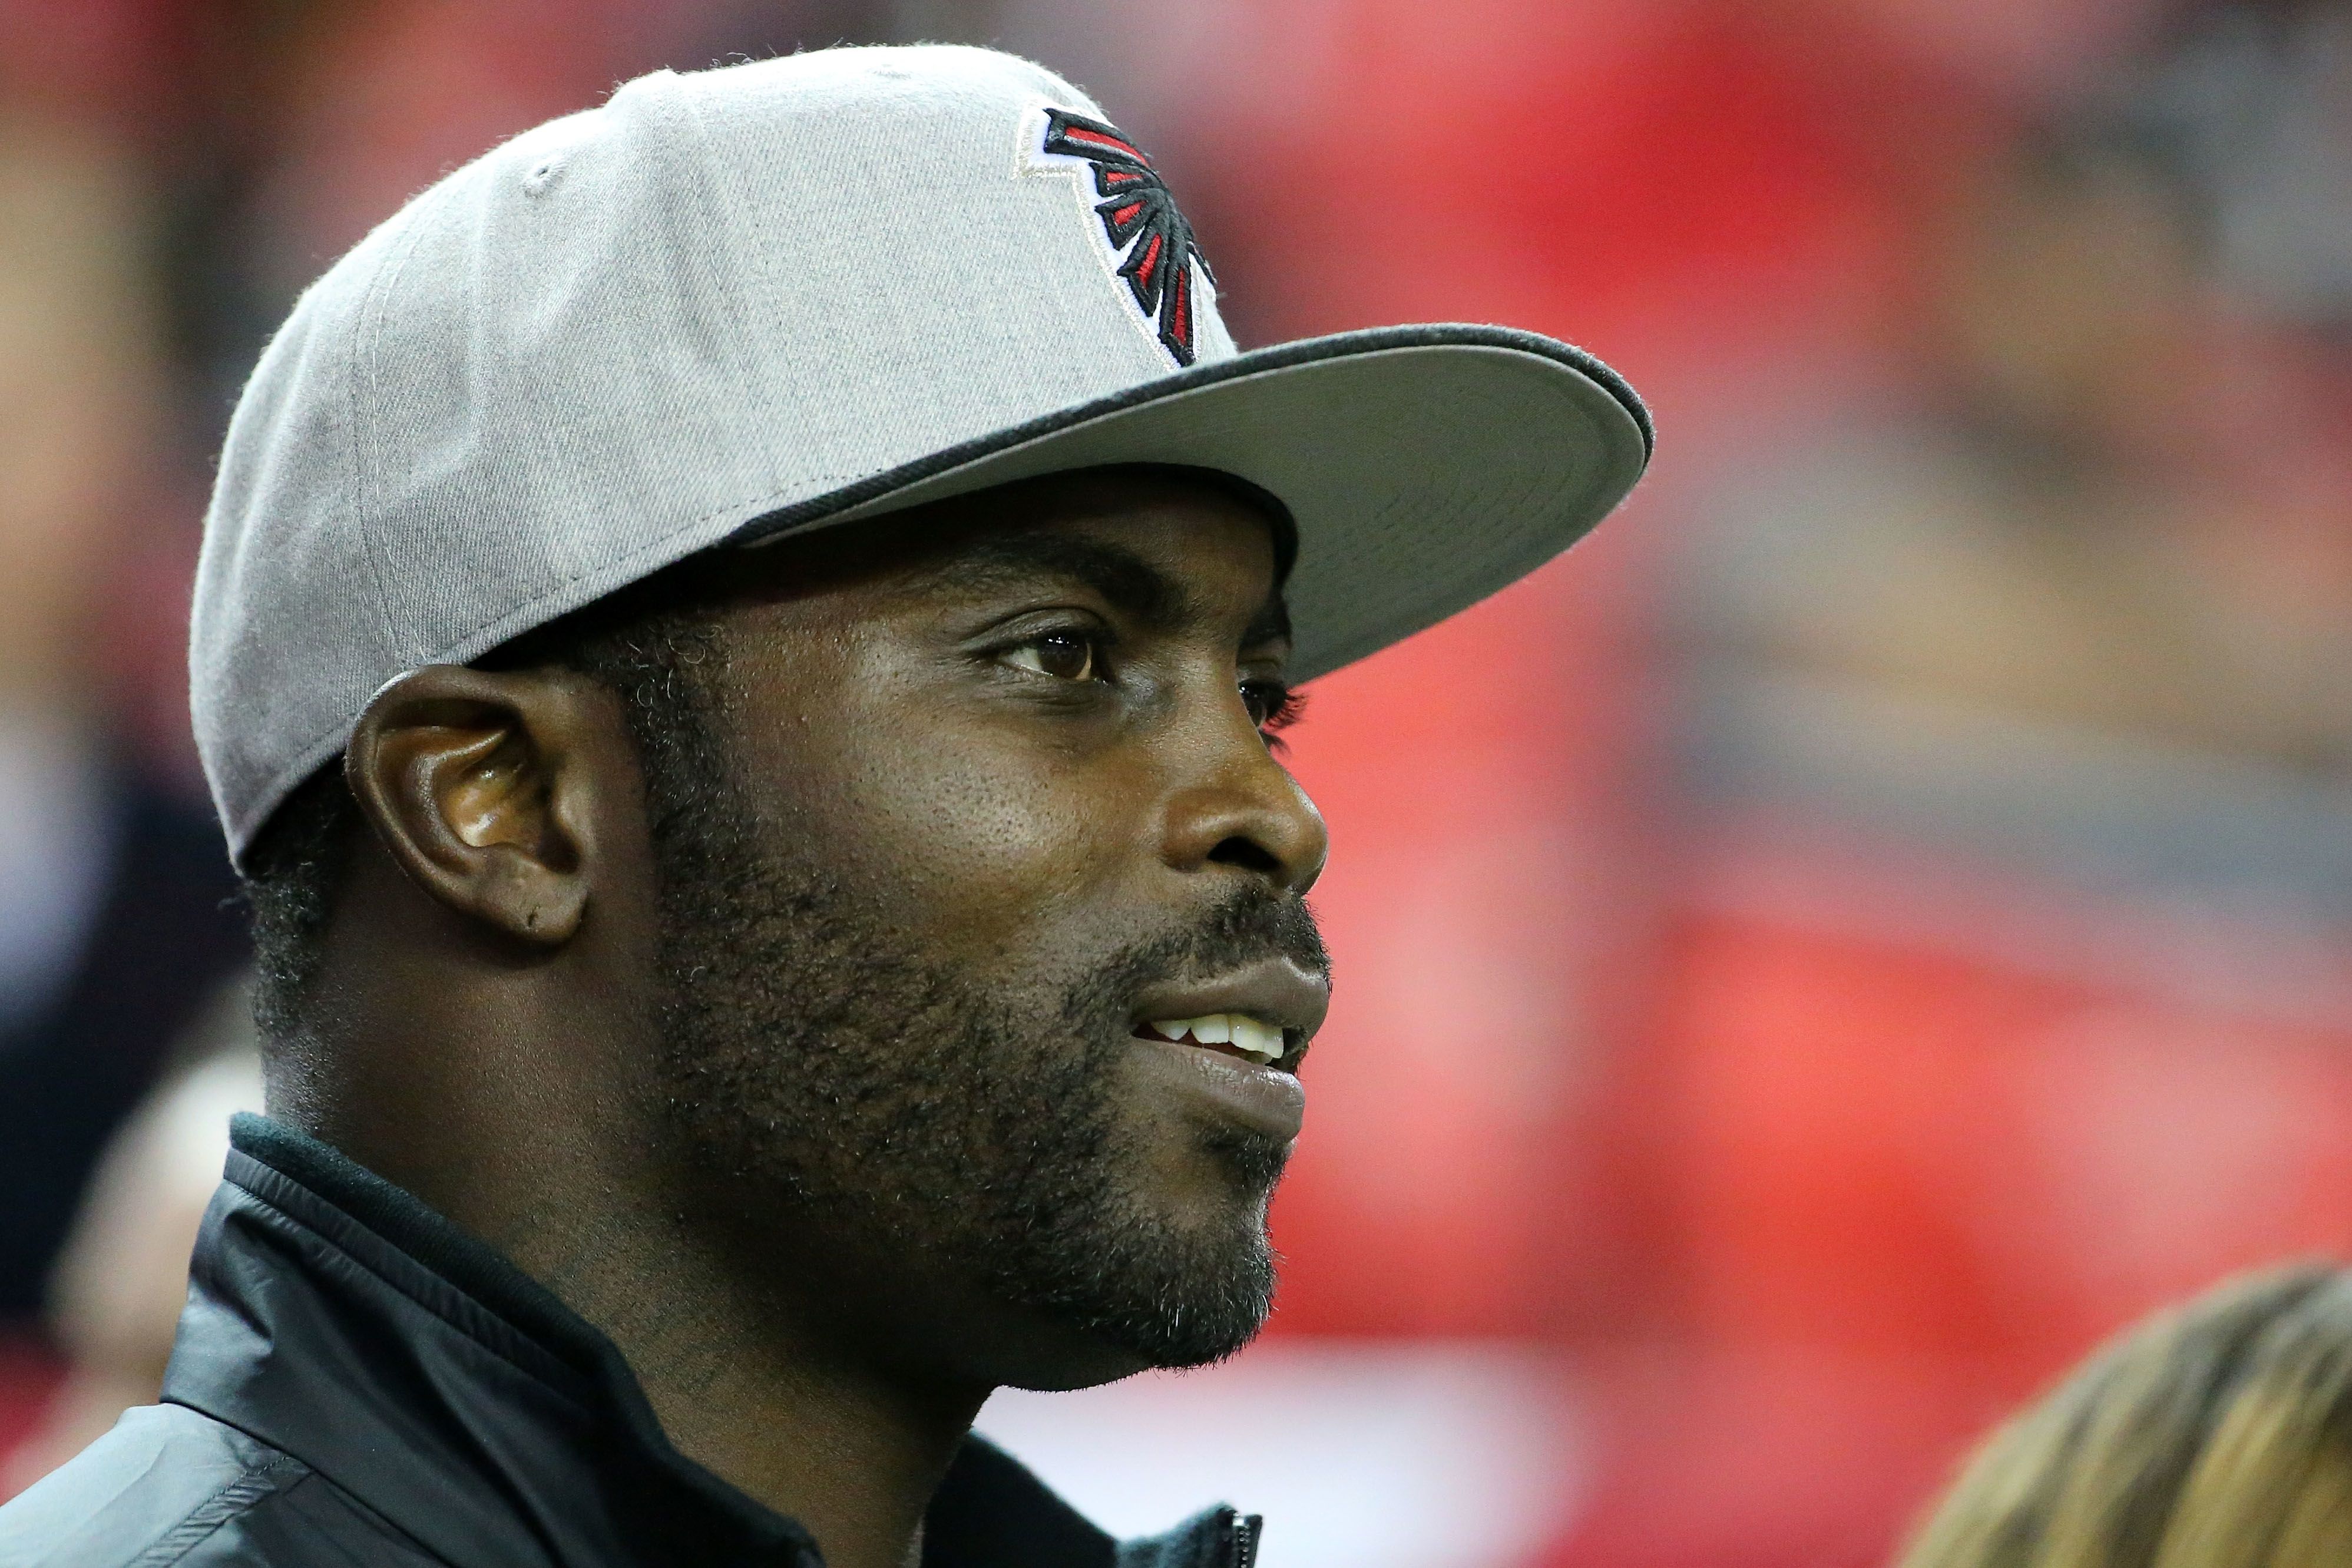 Michael Vick will serve as Pro Bowl captain despite a popular petition  calling for his removal